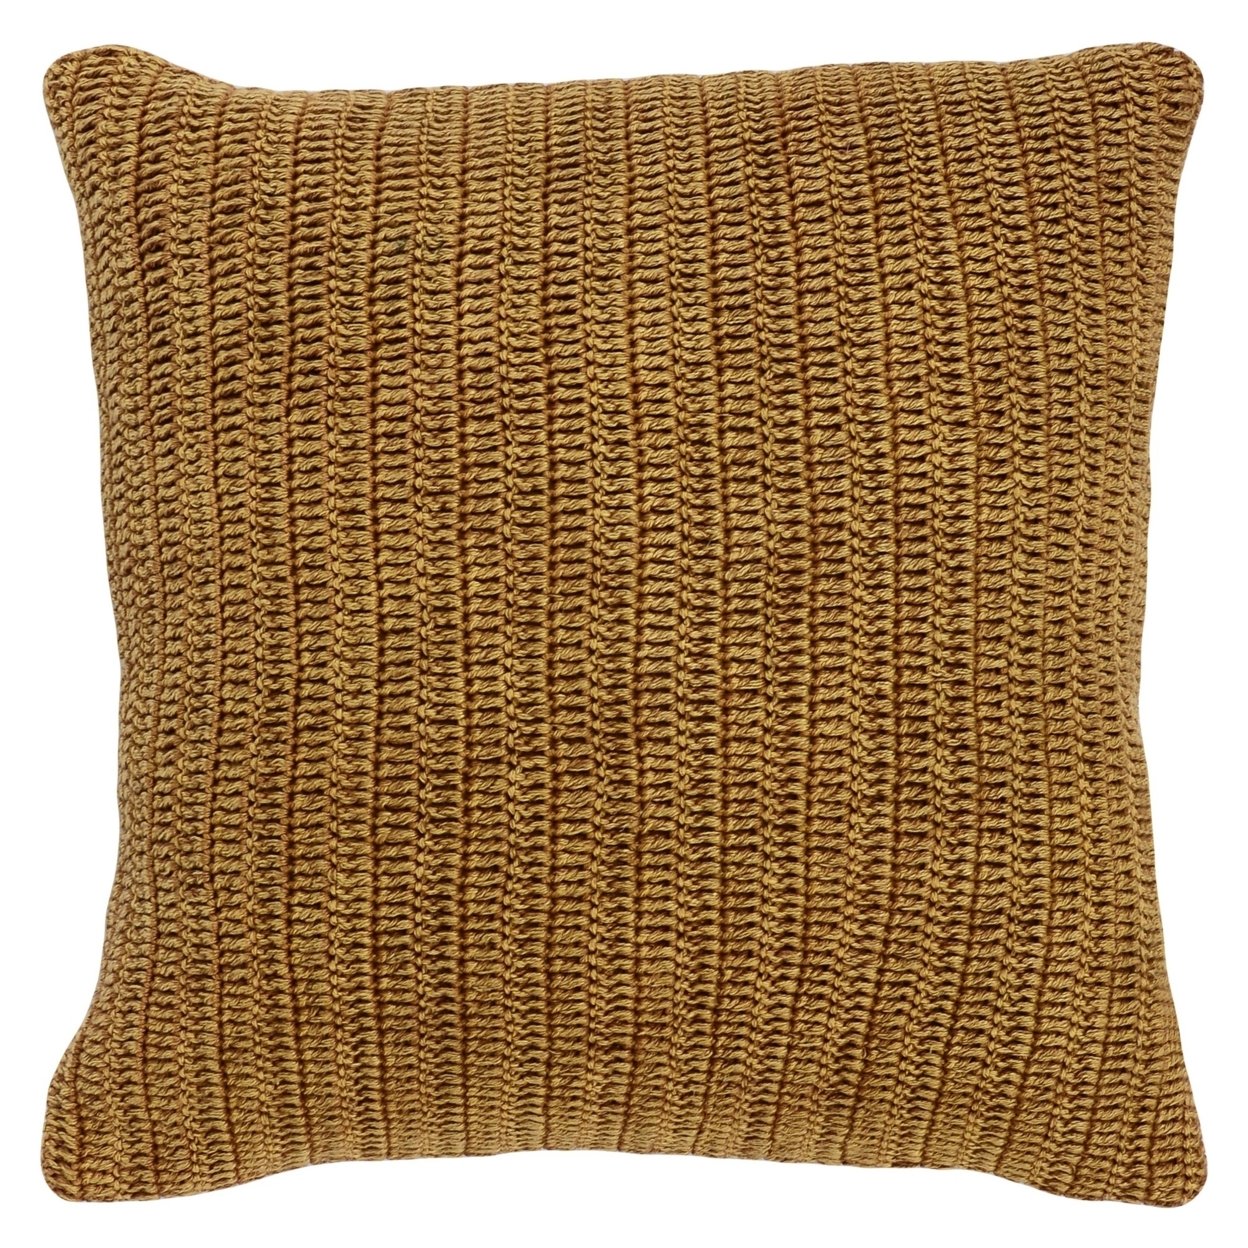 Rosie 22 Inch Square Accent Throw Pillow, Hand Knitted Designs, Brown Linen- Saltoro Sherpi